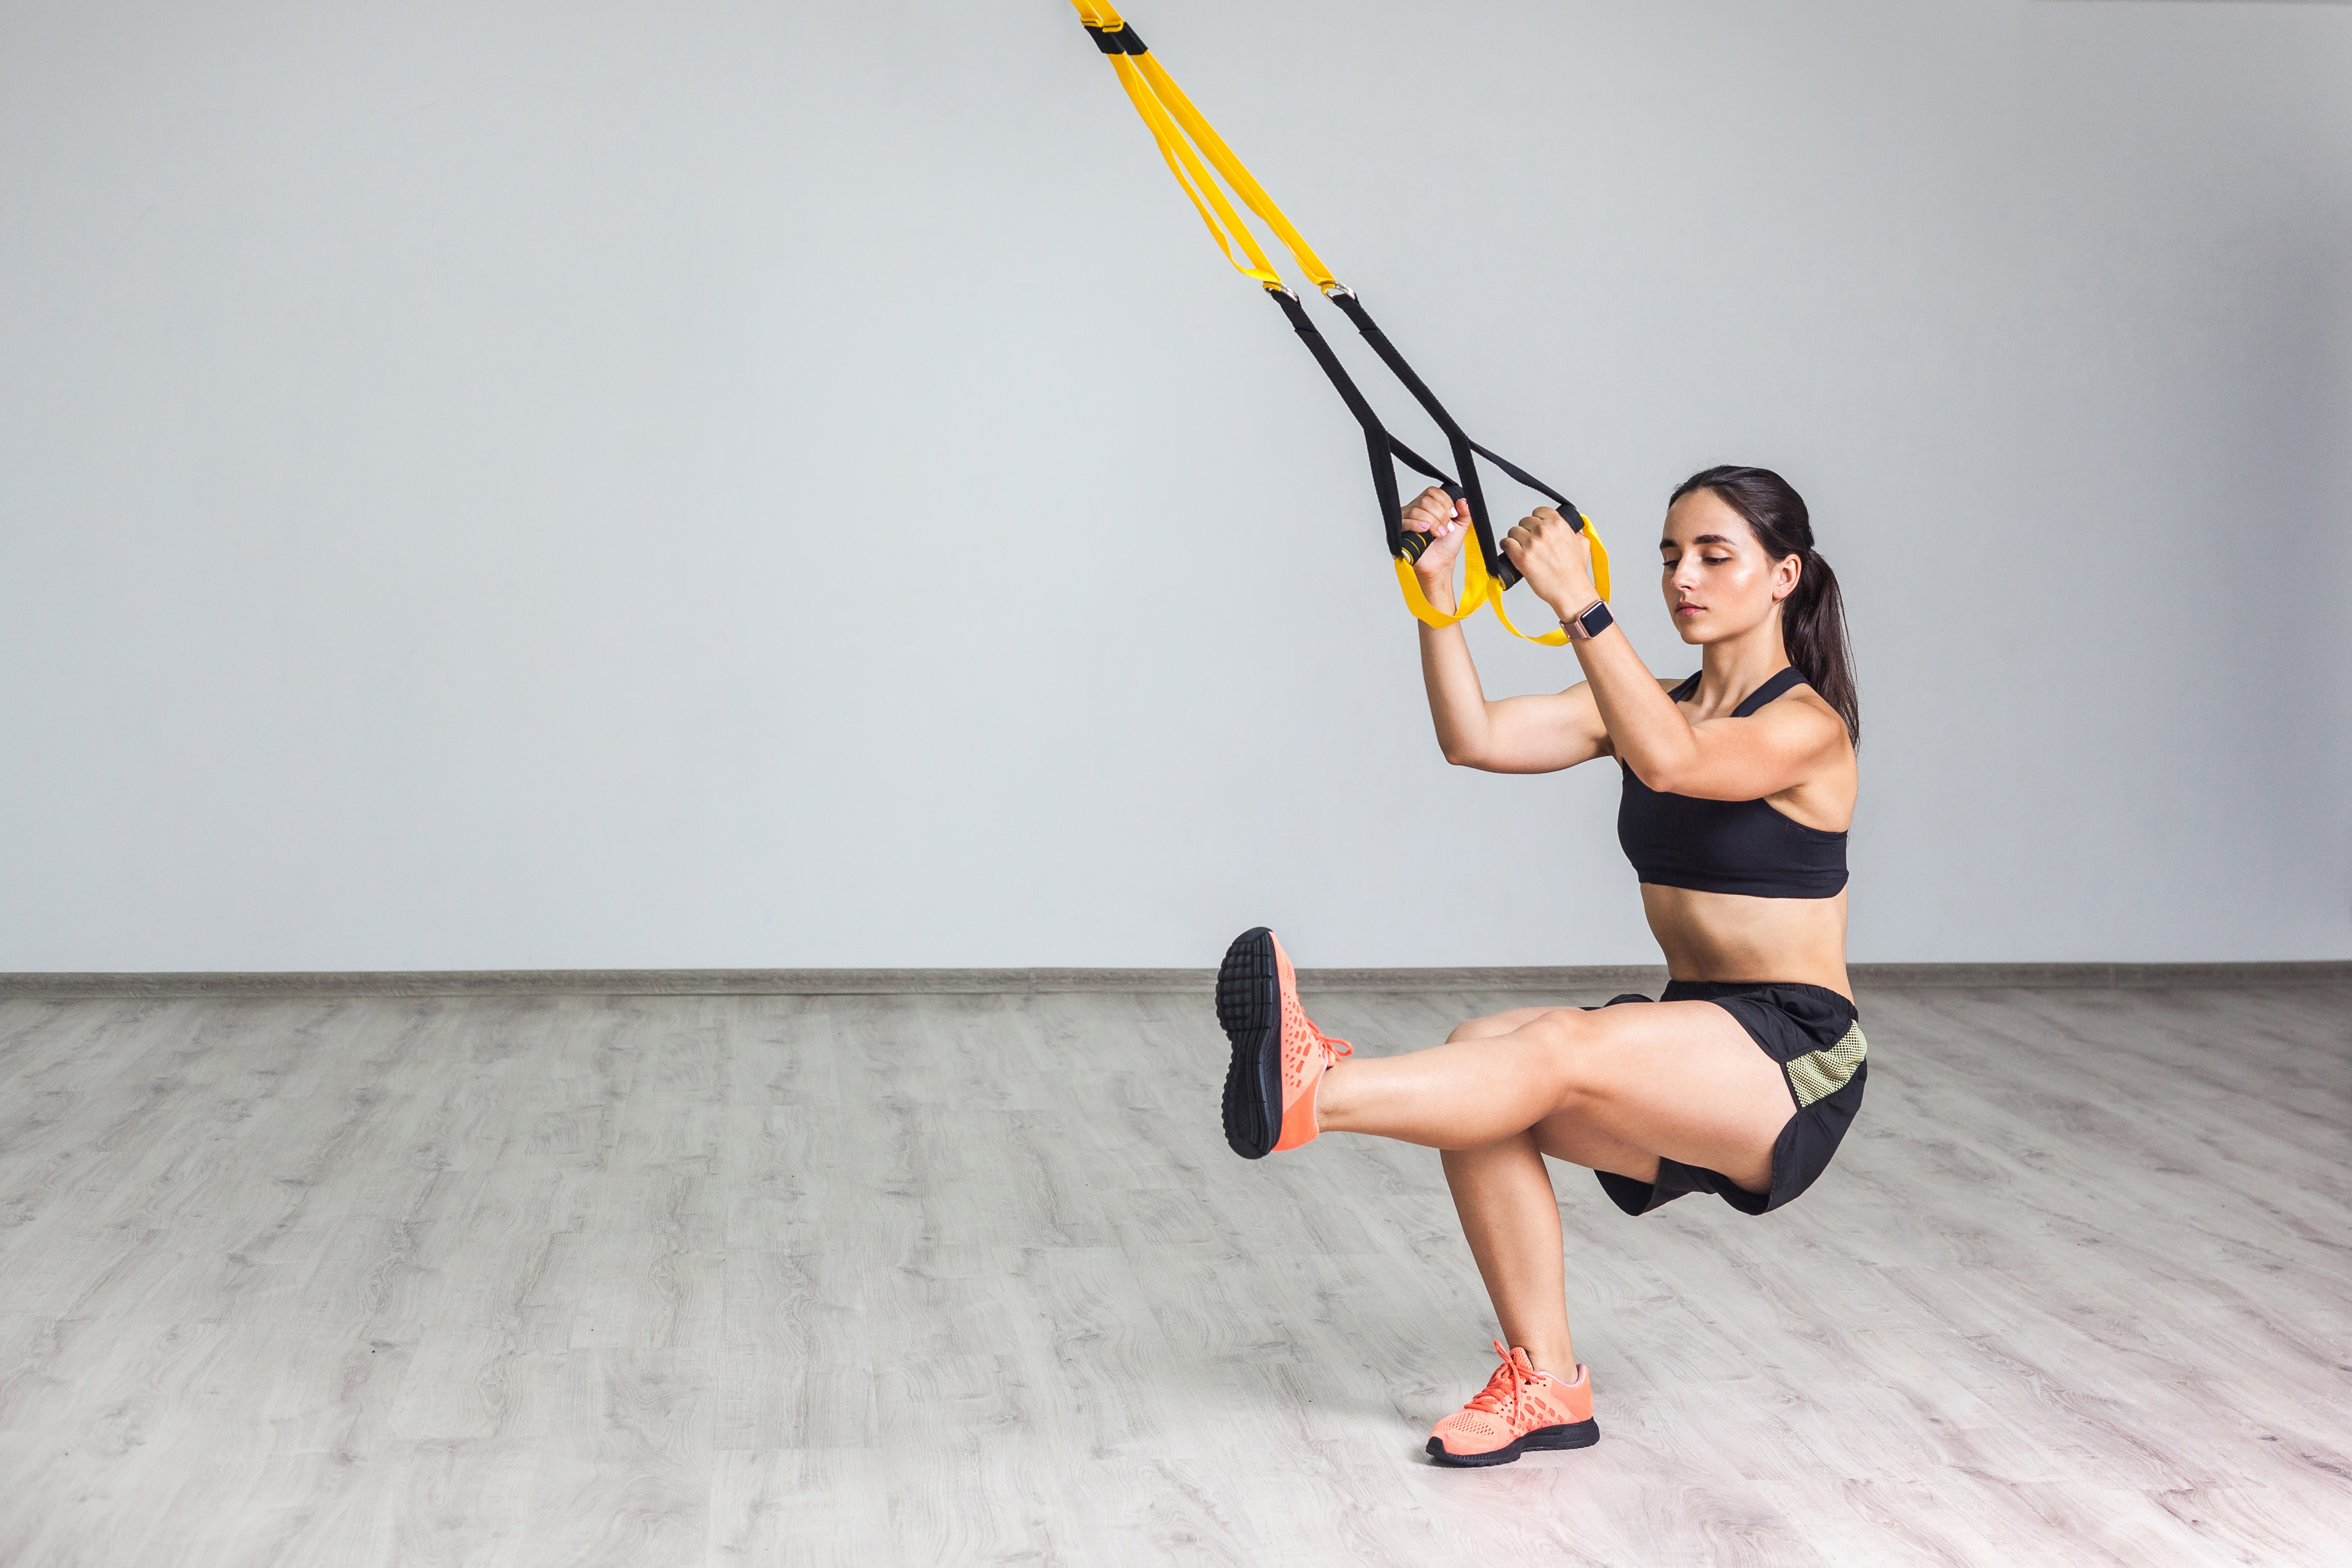 Master the Move: The Pistol Squat, Fitness